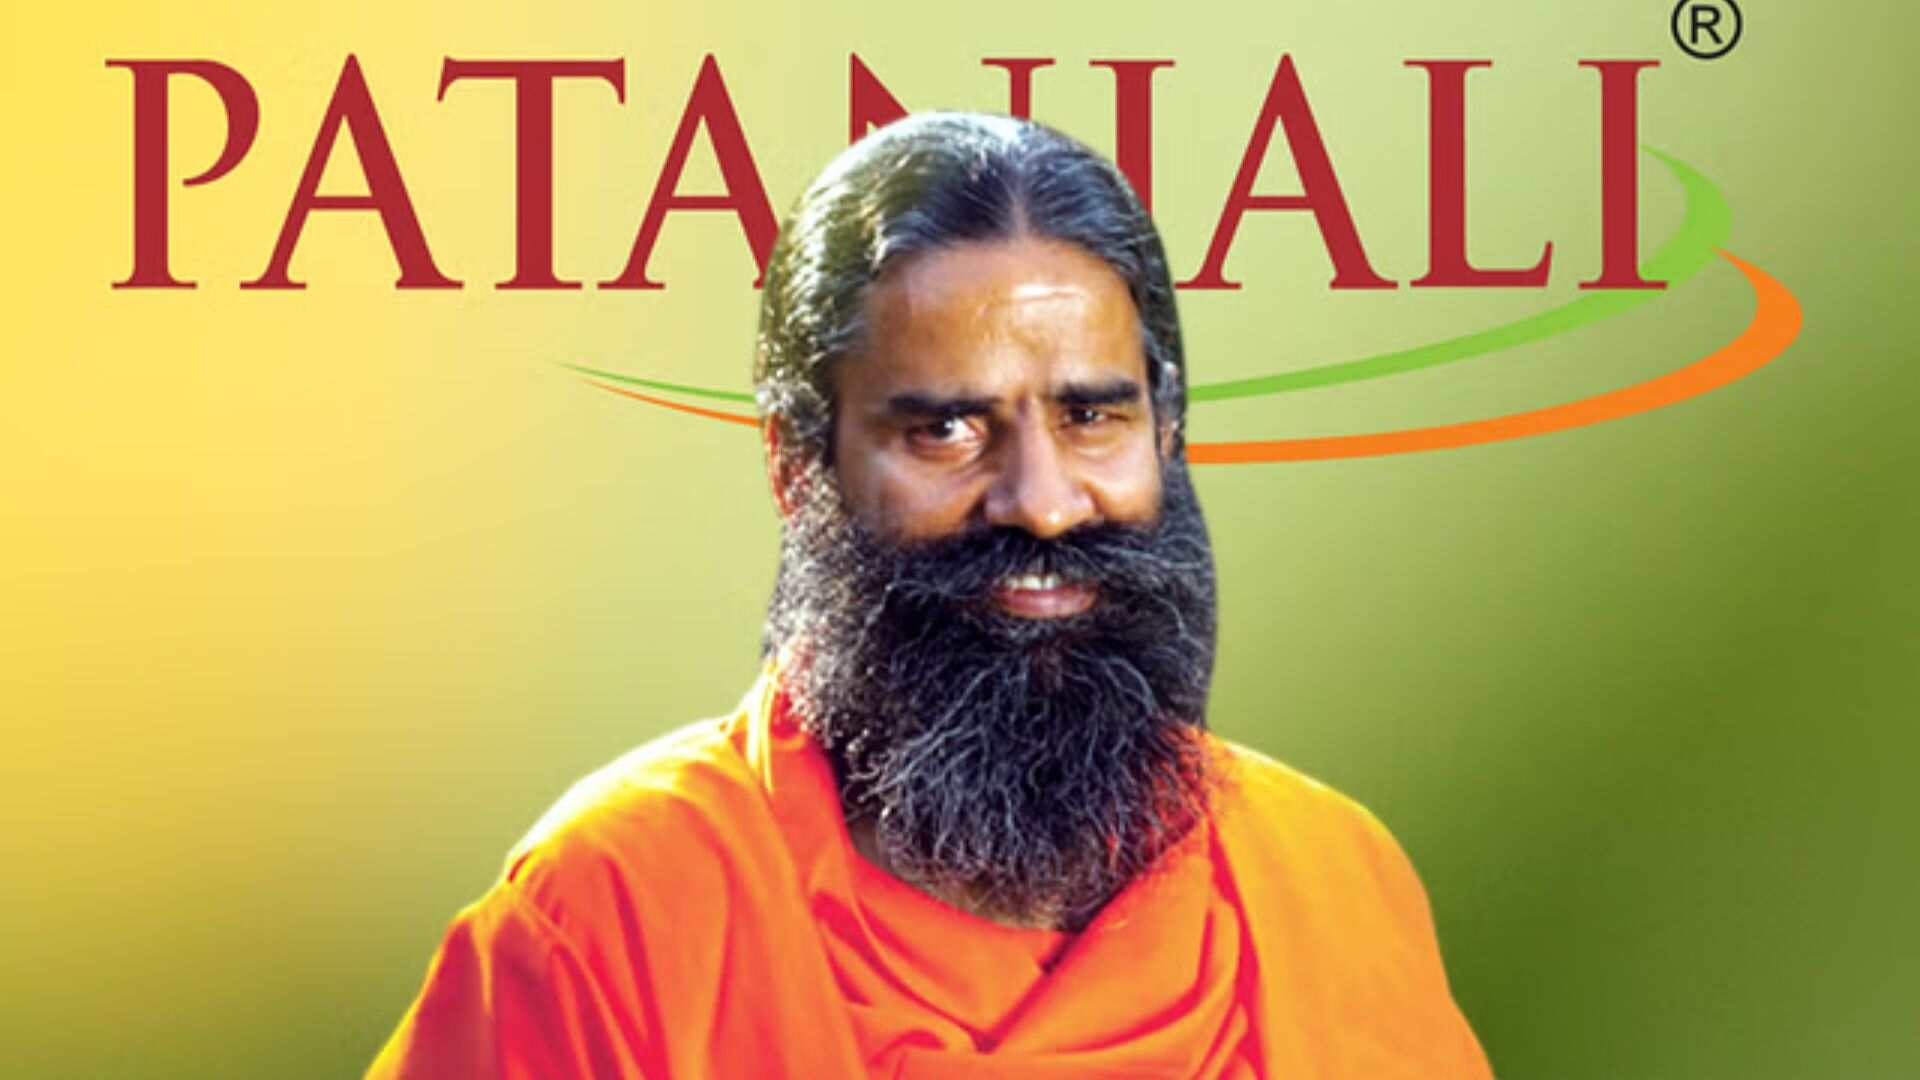 Patanjali Faces Double Blow: DGCI Imposes Rs. 27.5 Crore Penalty